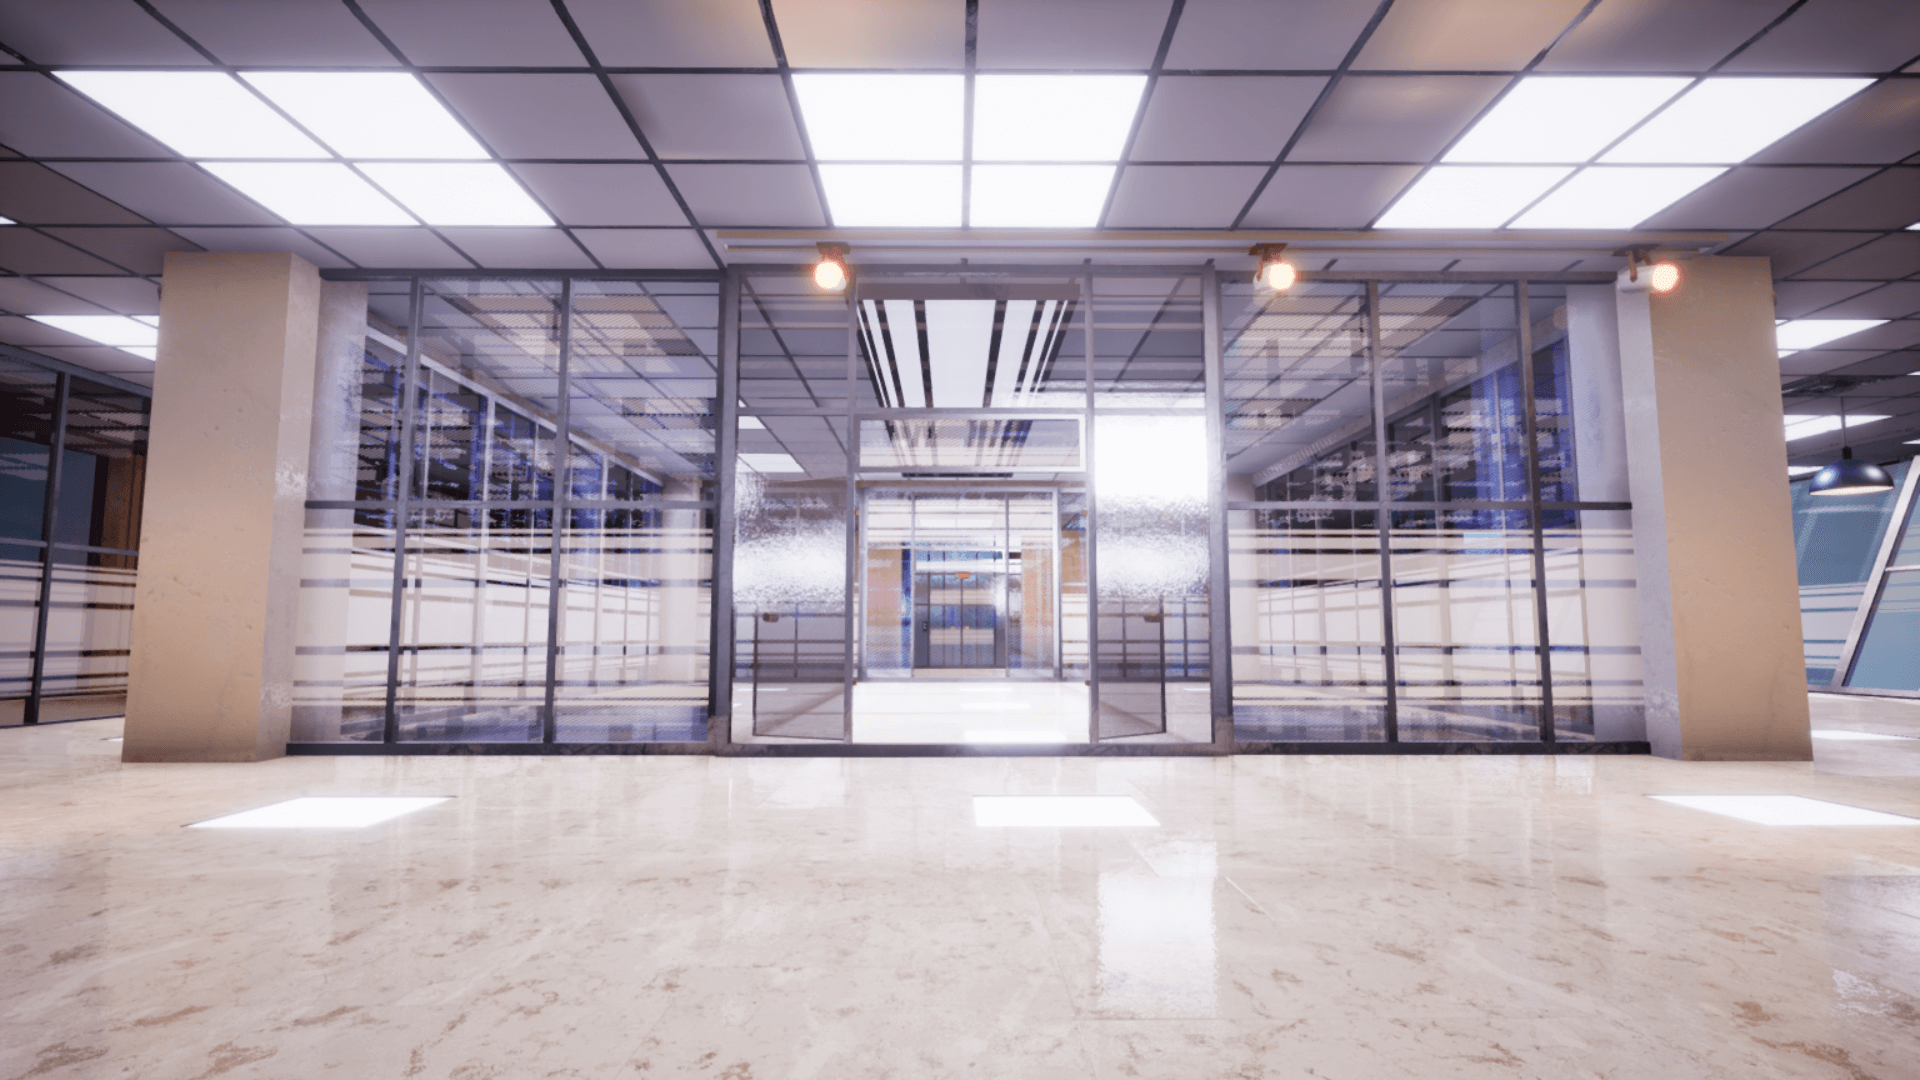 An image showing Modular Glass Building asset pack, created with Unreal Engine.